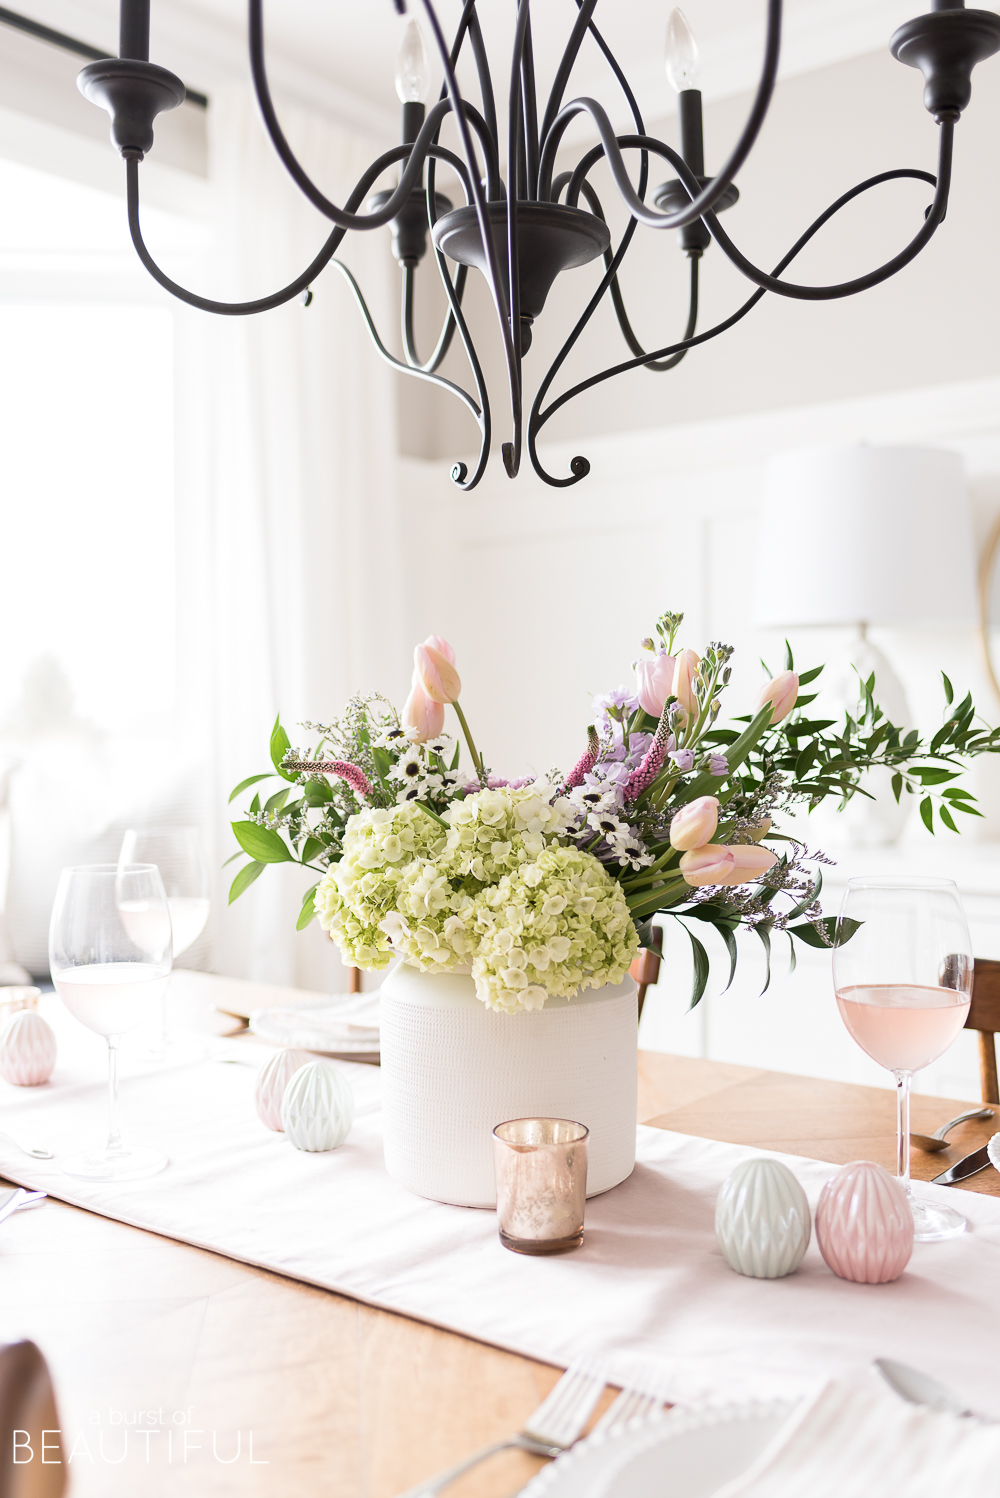 Celebrate Easter around a table set with classic white dishes, linens in pastel shades and a centerpiece full of spring blooms. 